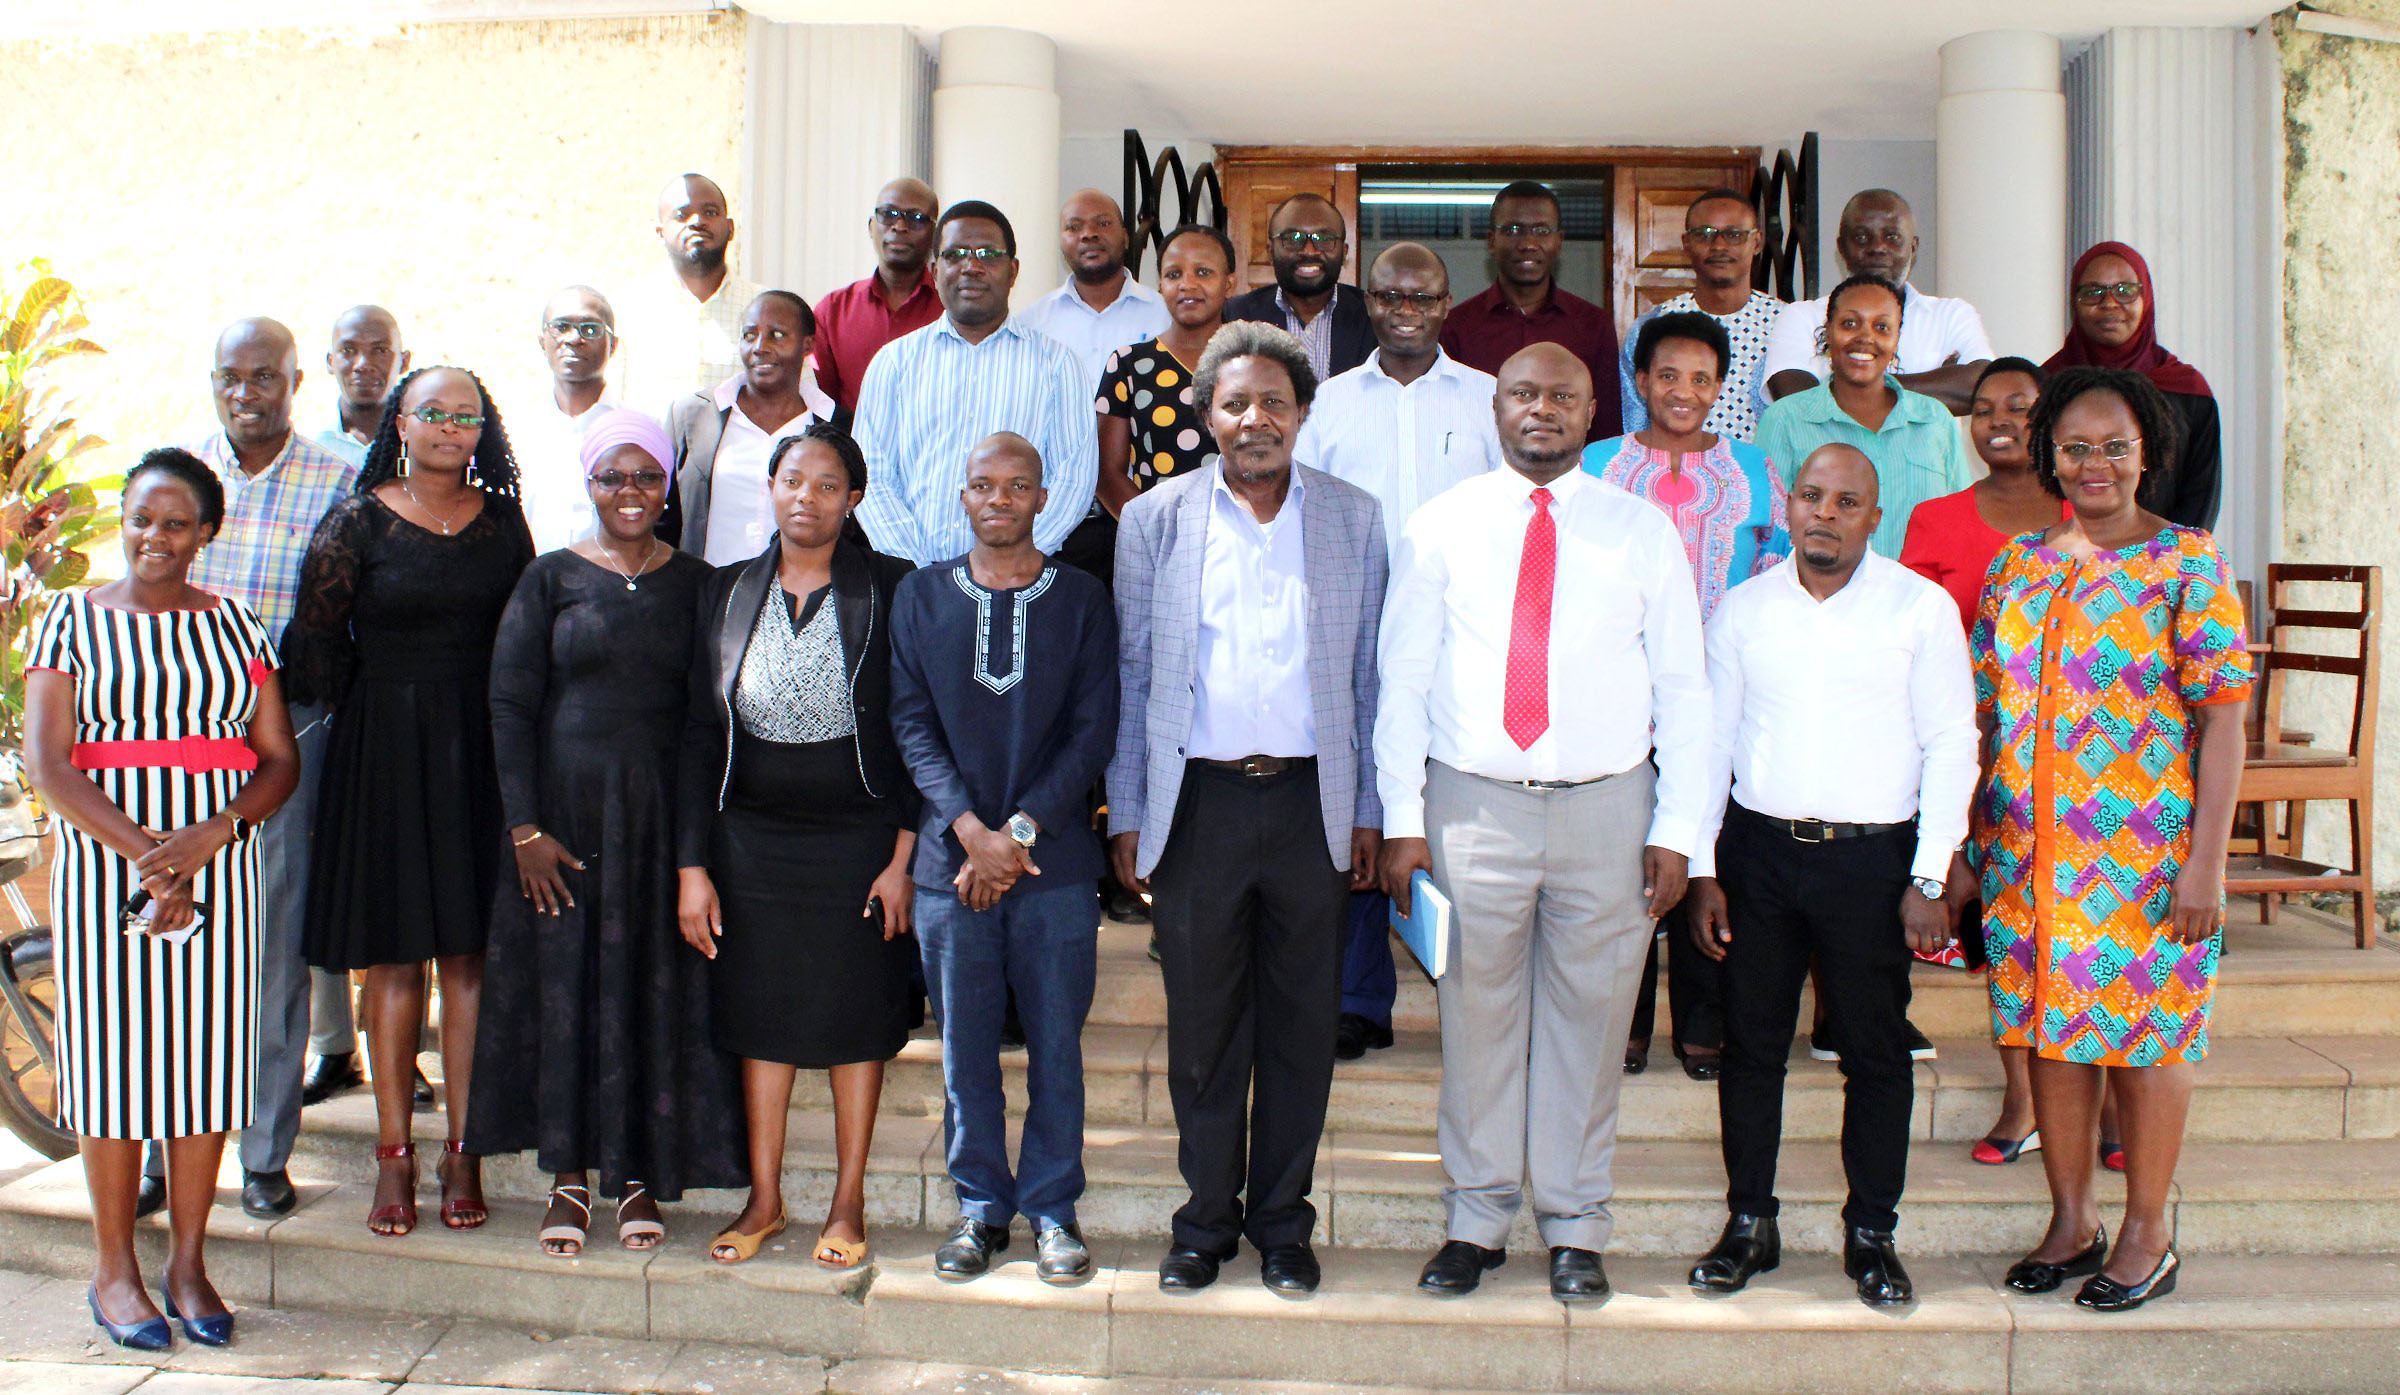 The Deputy Principal CHUSS-Dr. Eric Awich Ochen (3rd R) and Dean, School of Liberal and Performing Arts Associate Prof. Patrick Mangeni (4th R) with college officials and the Gerda Henkel Siftung Cohort 2022 PhD Fellows after their orientation on 30th January 2023 at Makerere University, Kampala Uganda..